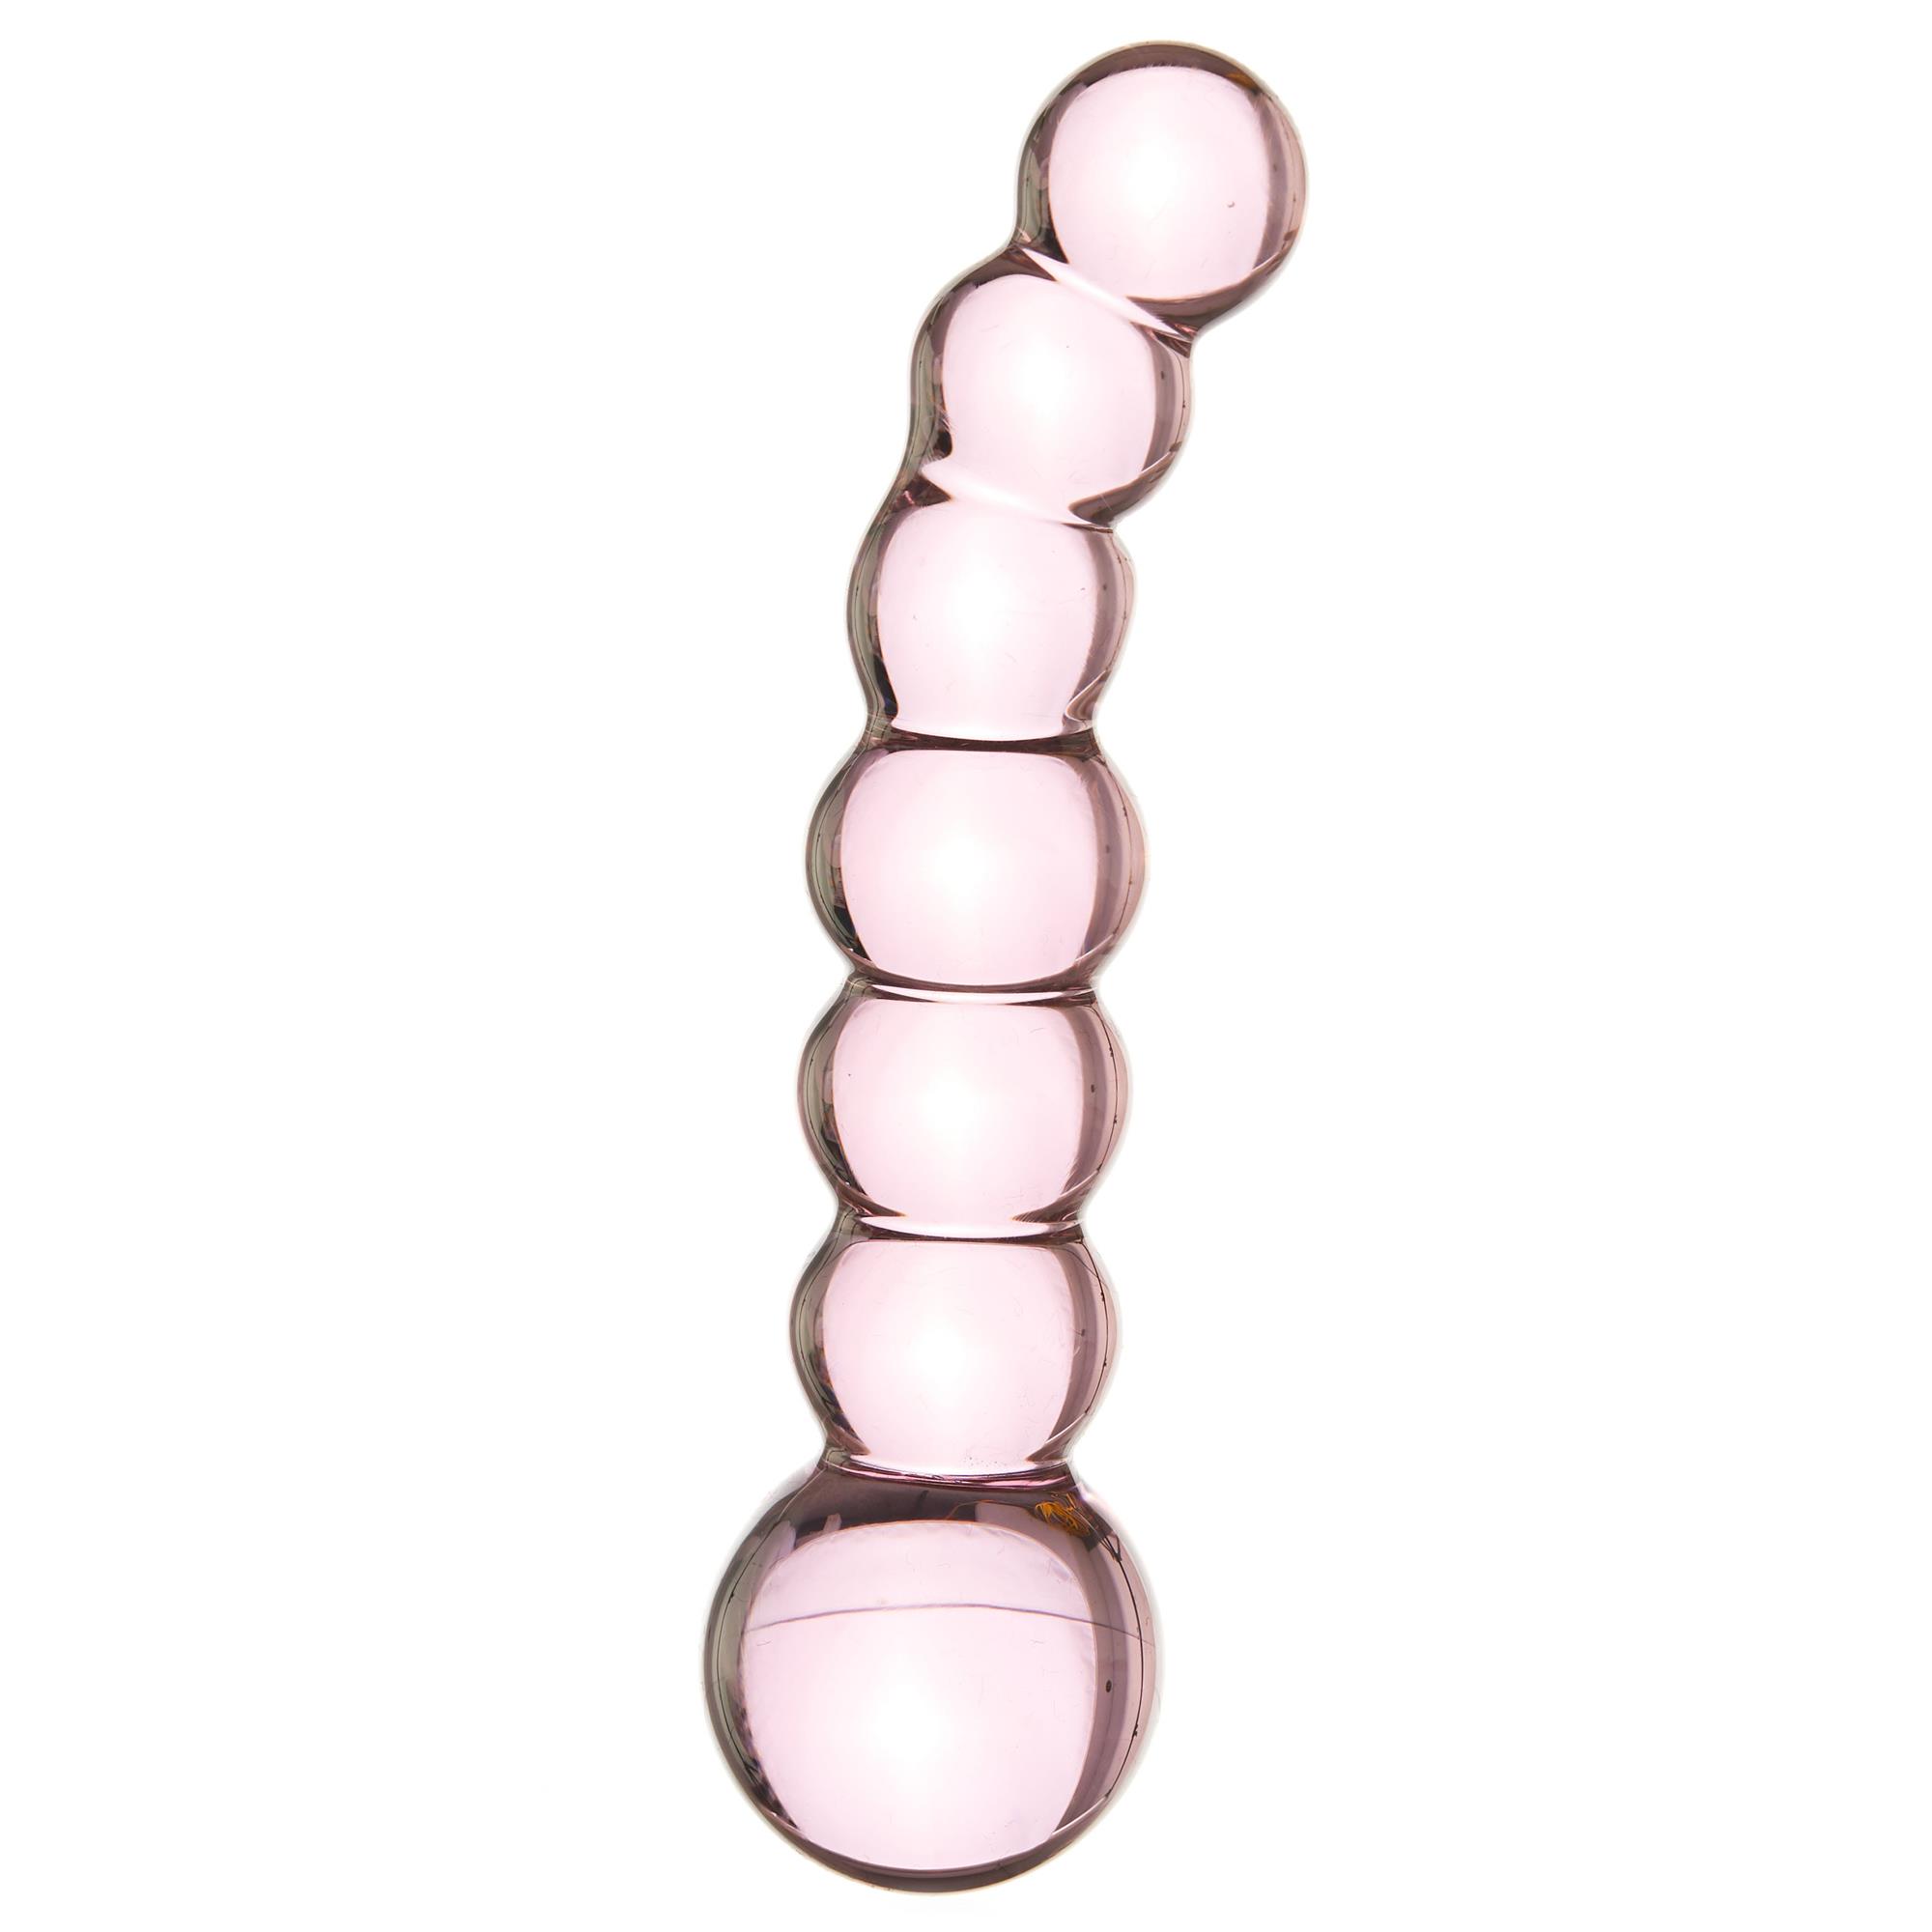 THE PINK BUBBLE GLASS DILDO